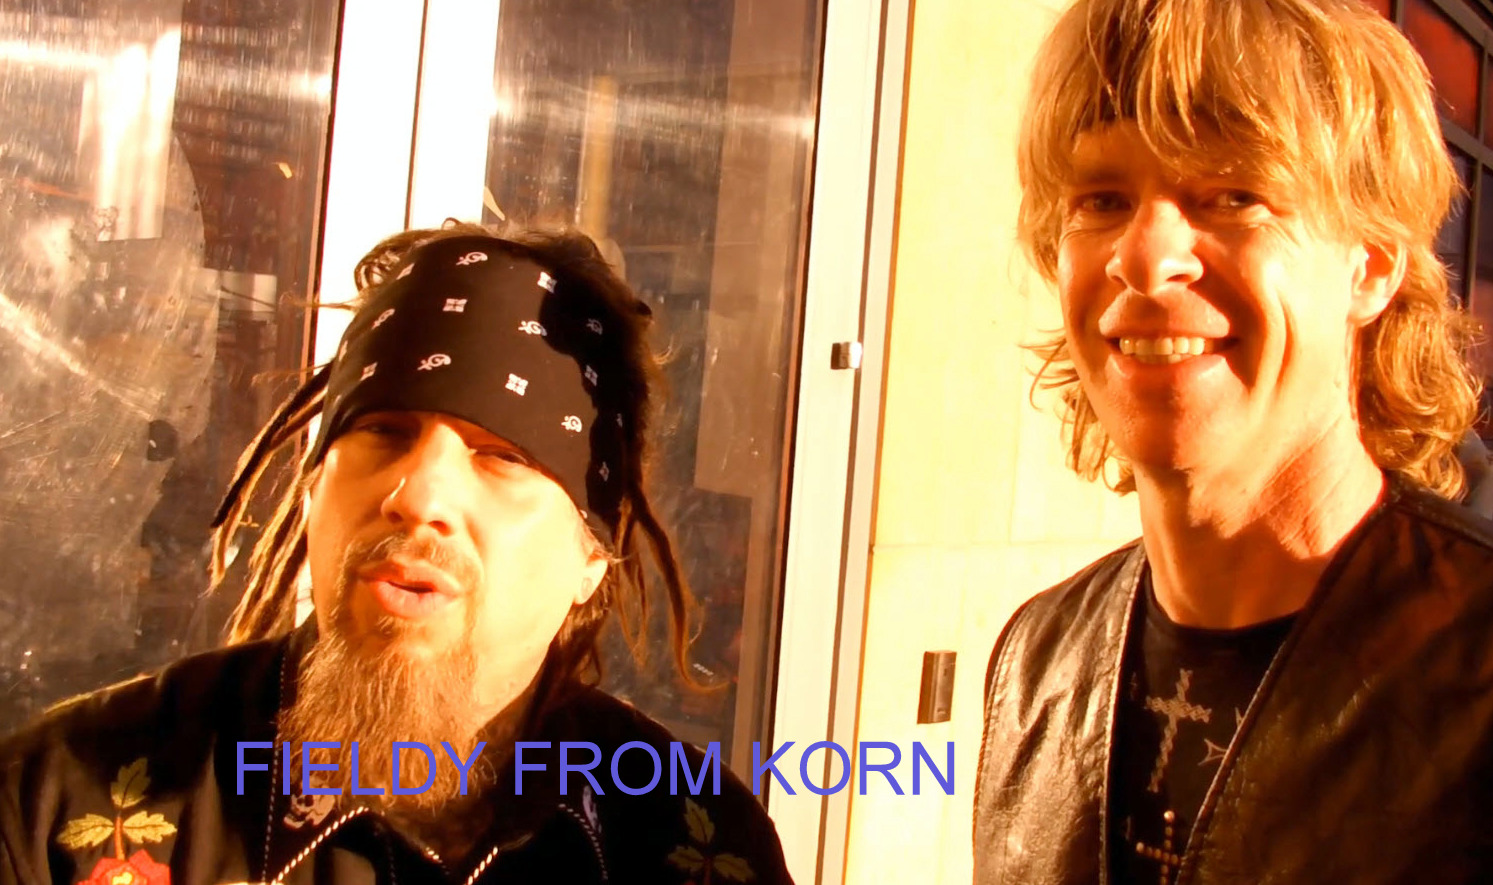 Gregory Graham aka Heavy Metal Greg interviewing Fieldy of the band Korn at the Revolver Golden Gods Awards.